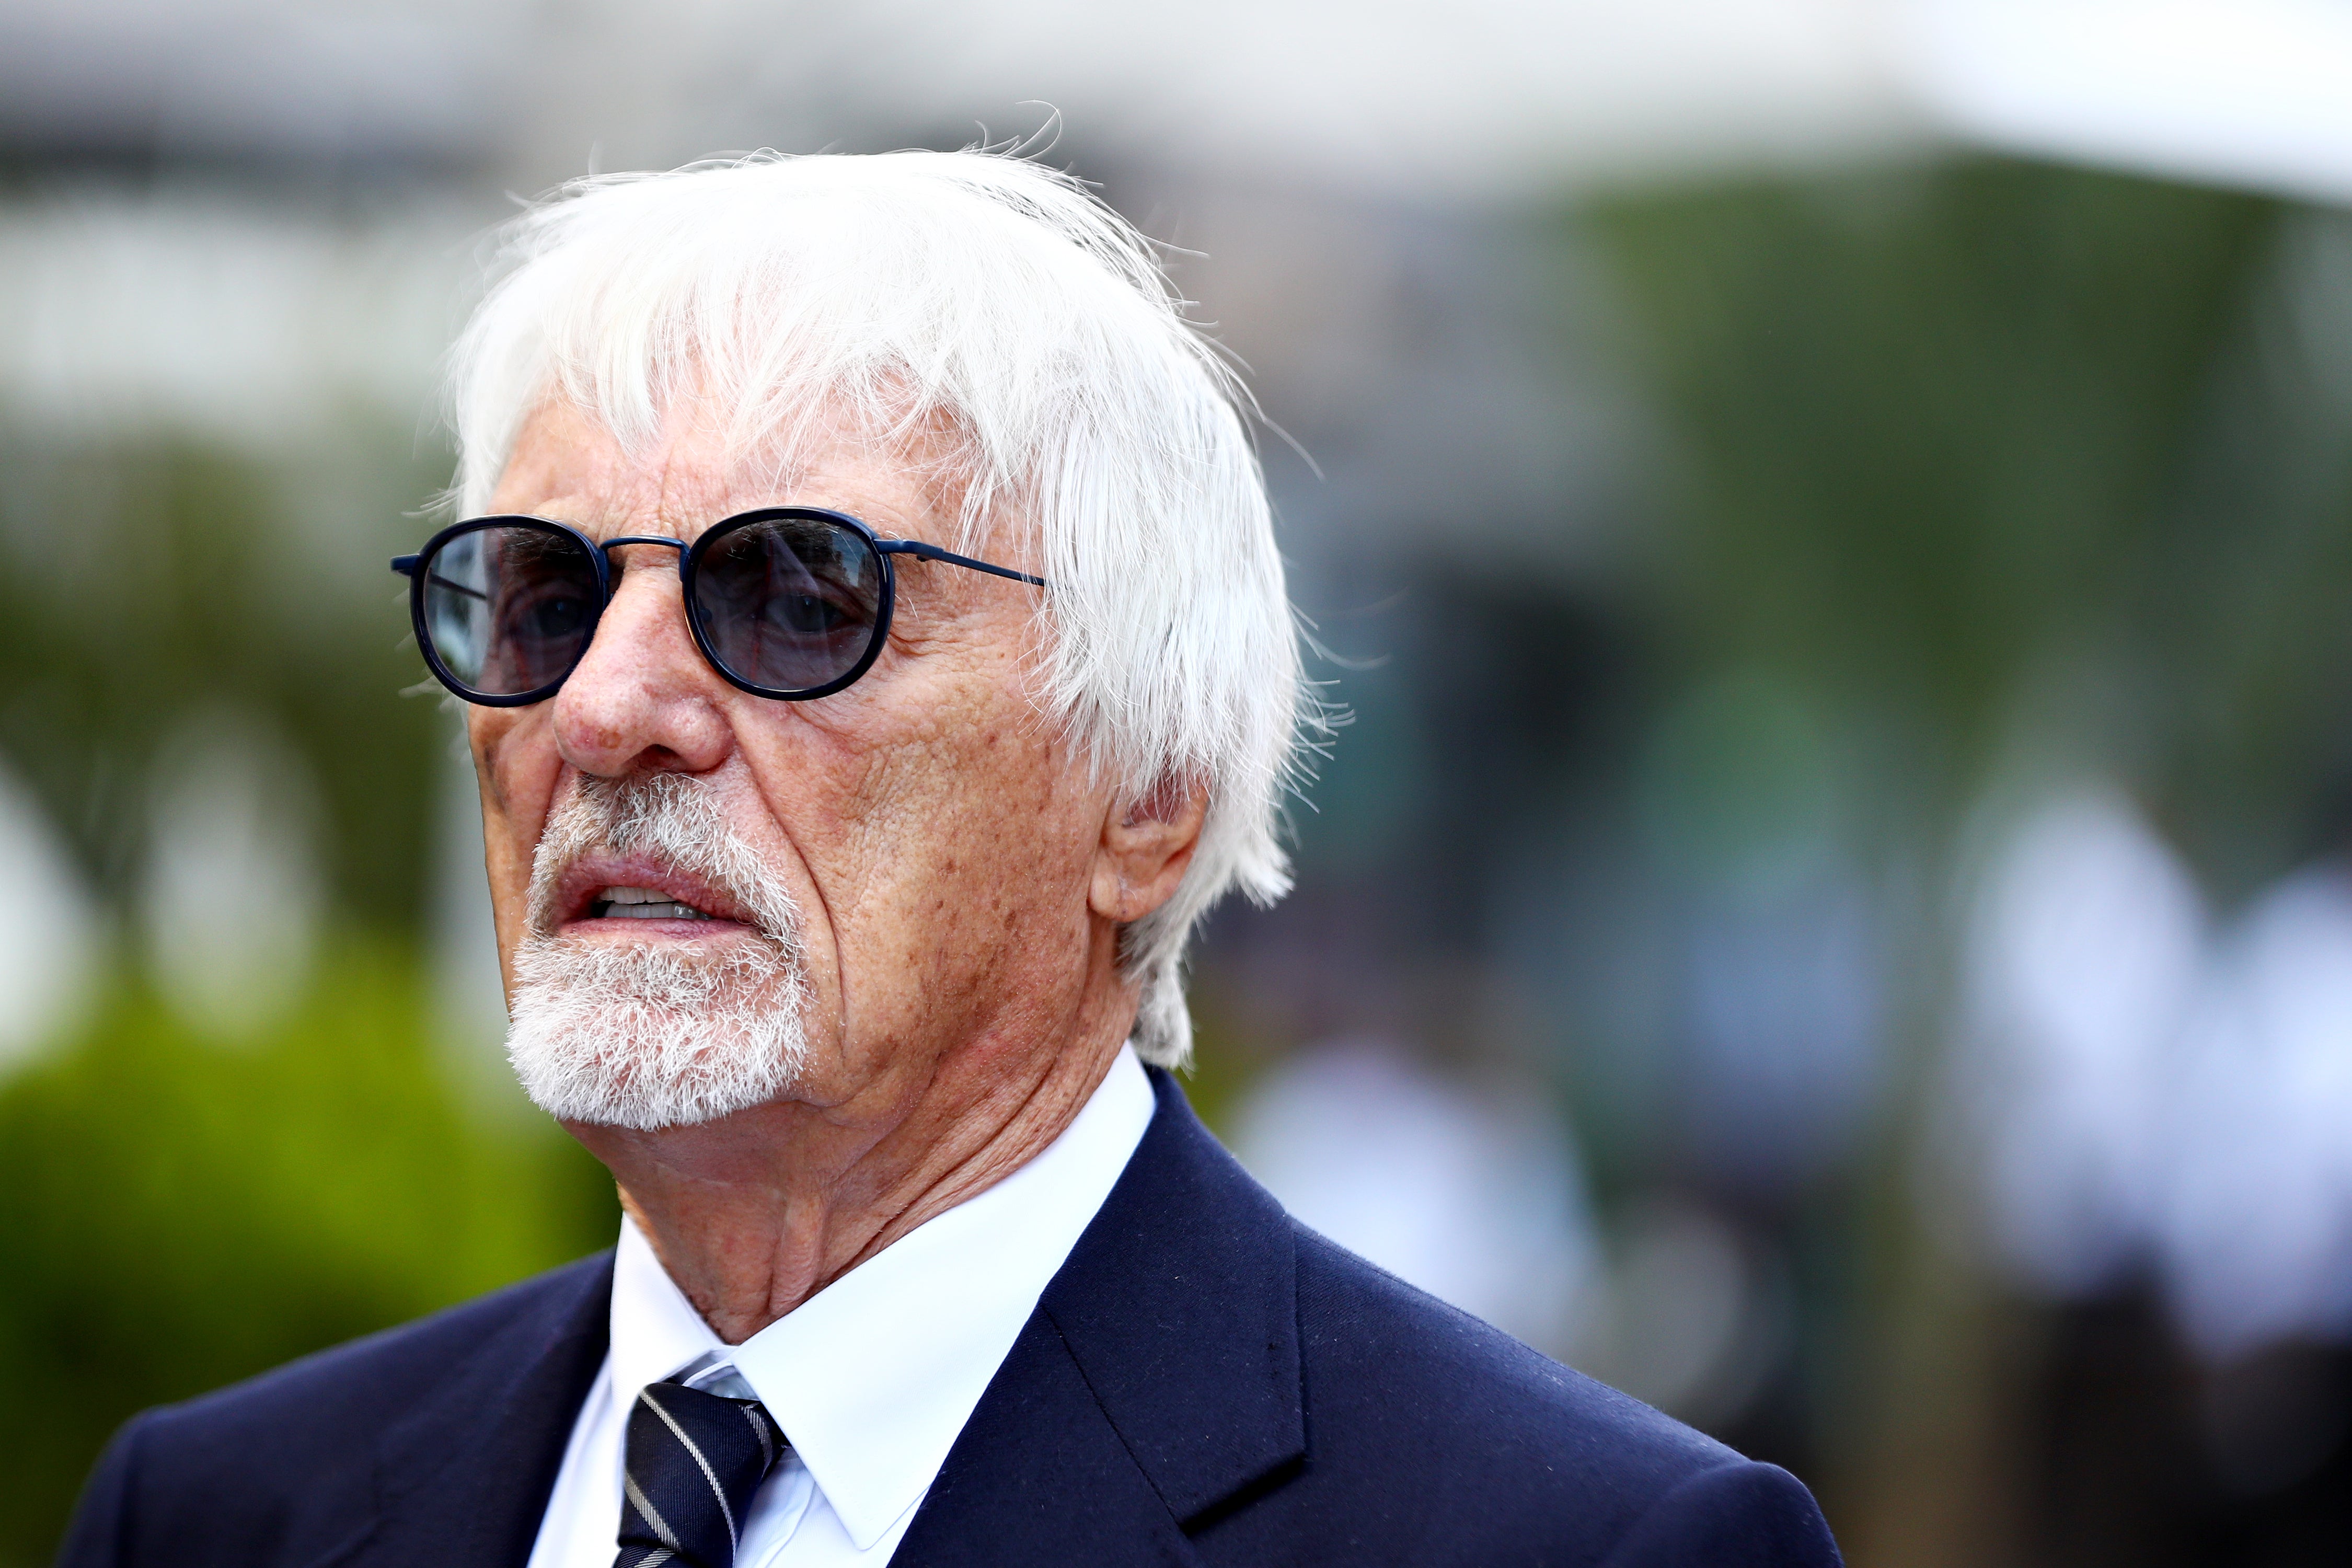 Bernie Ecclestone ran Formula 1 for 40 years before leaving the role of chief executive in 2017